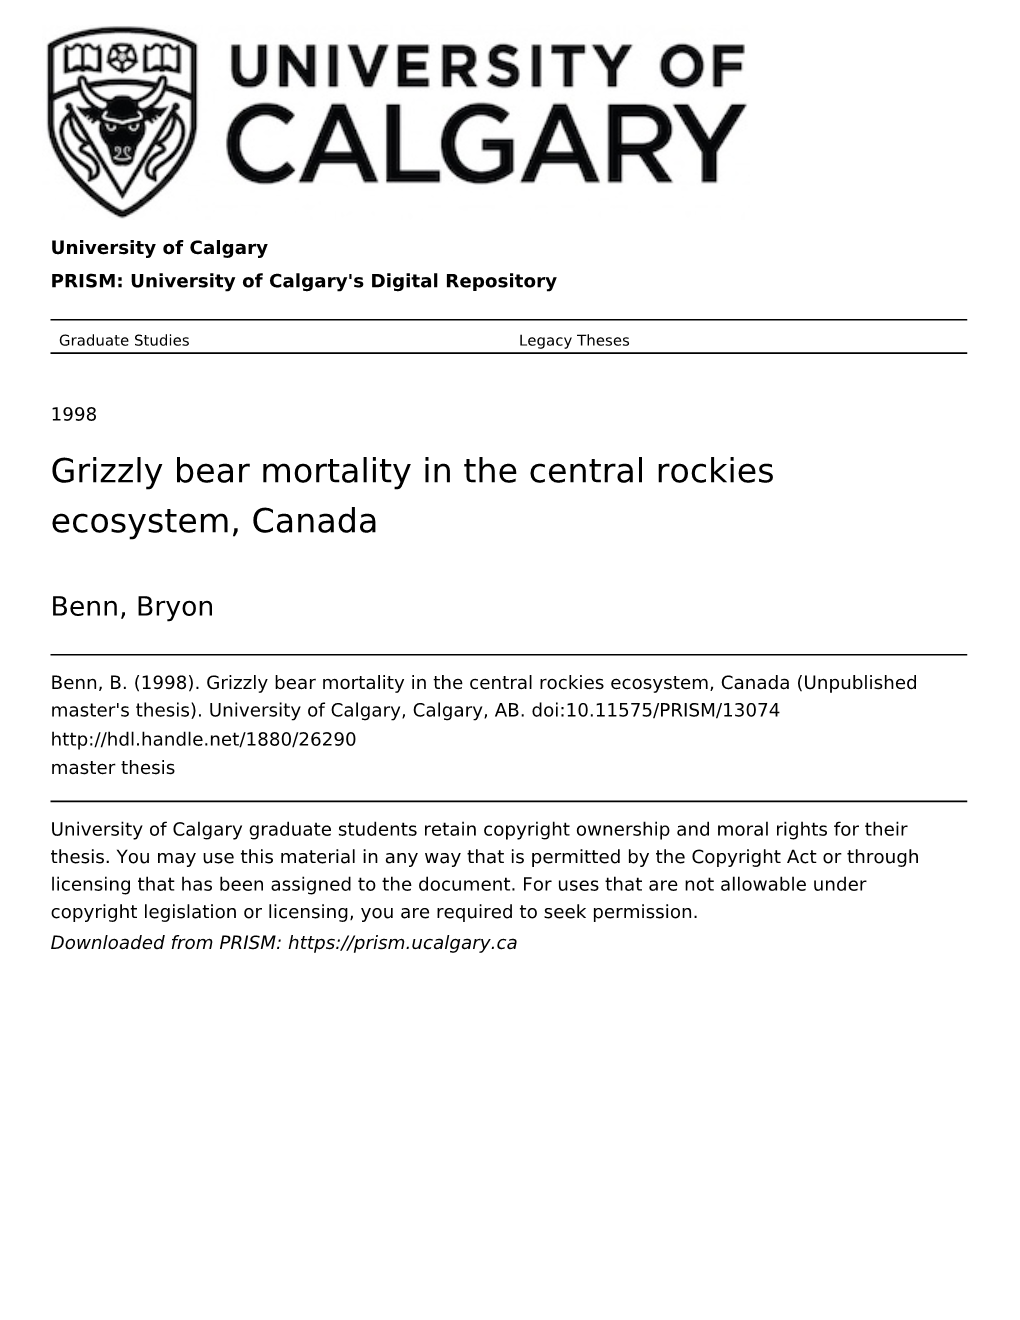 Grizzly Bear Mortality in the Central Rockies Ecosystem, Canada